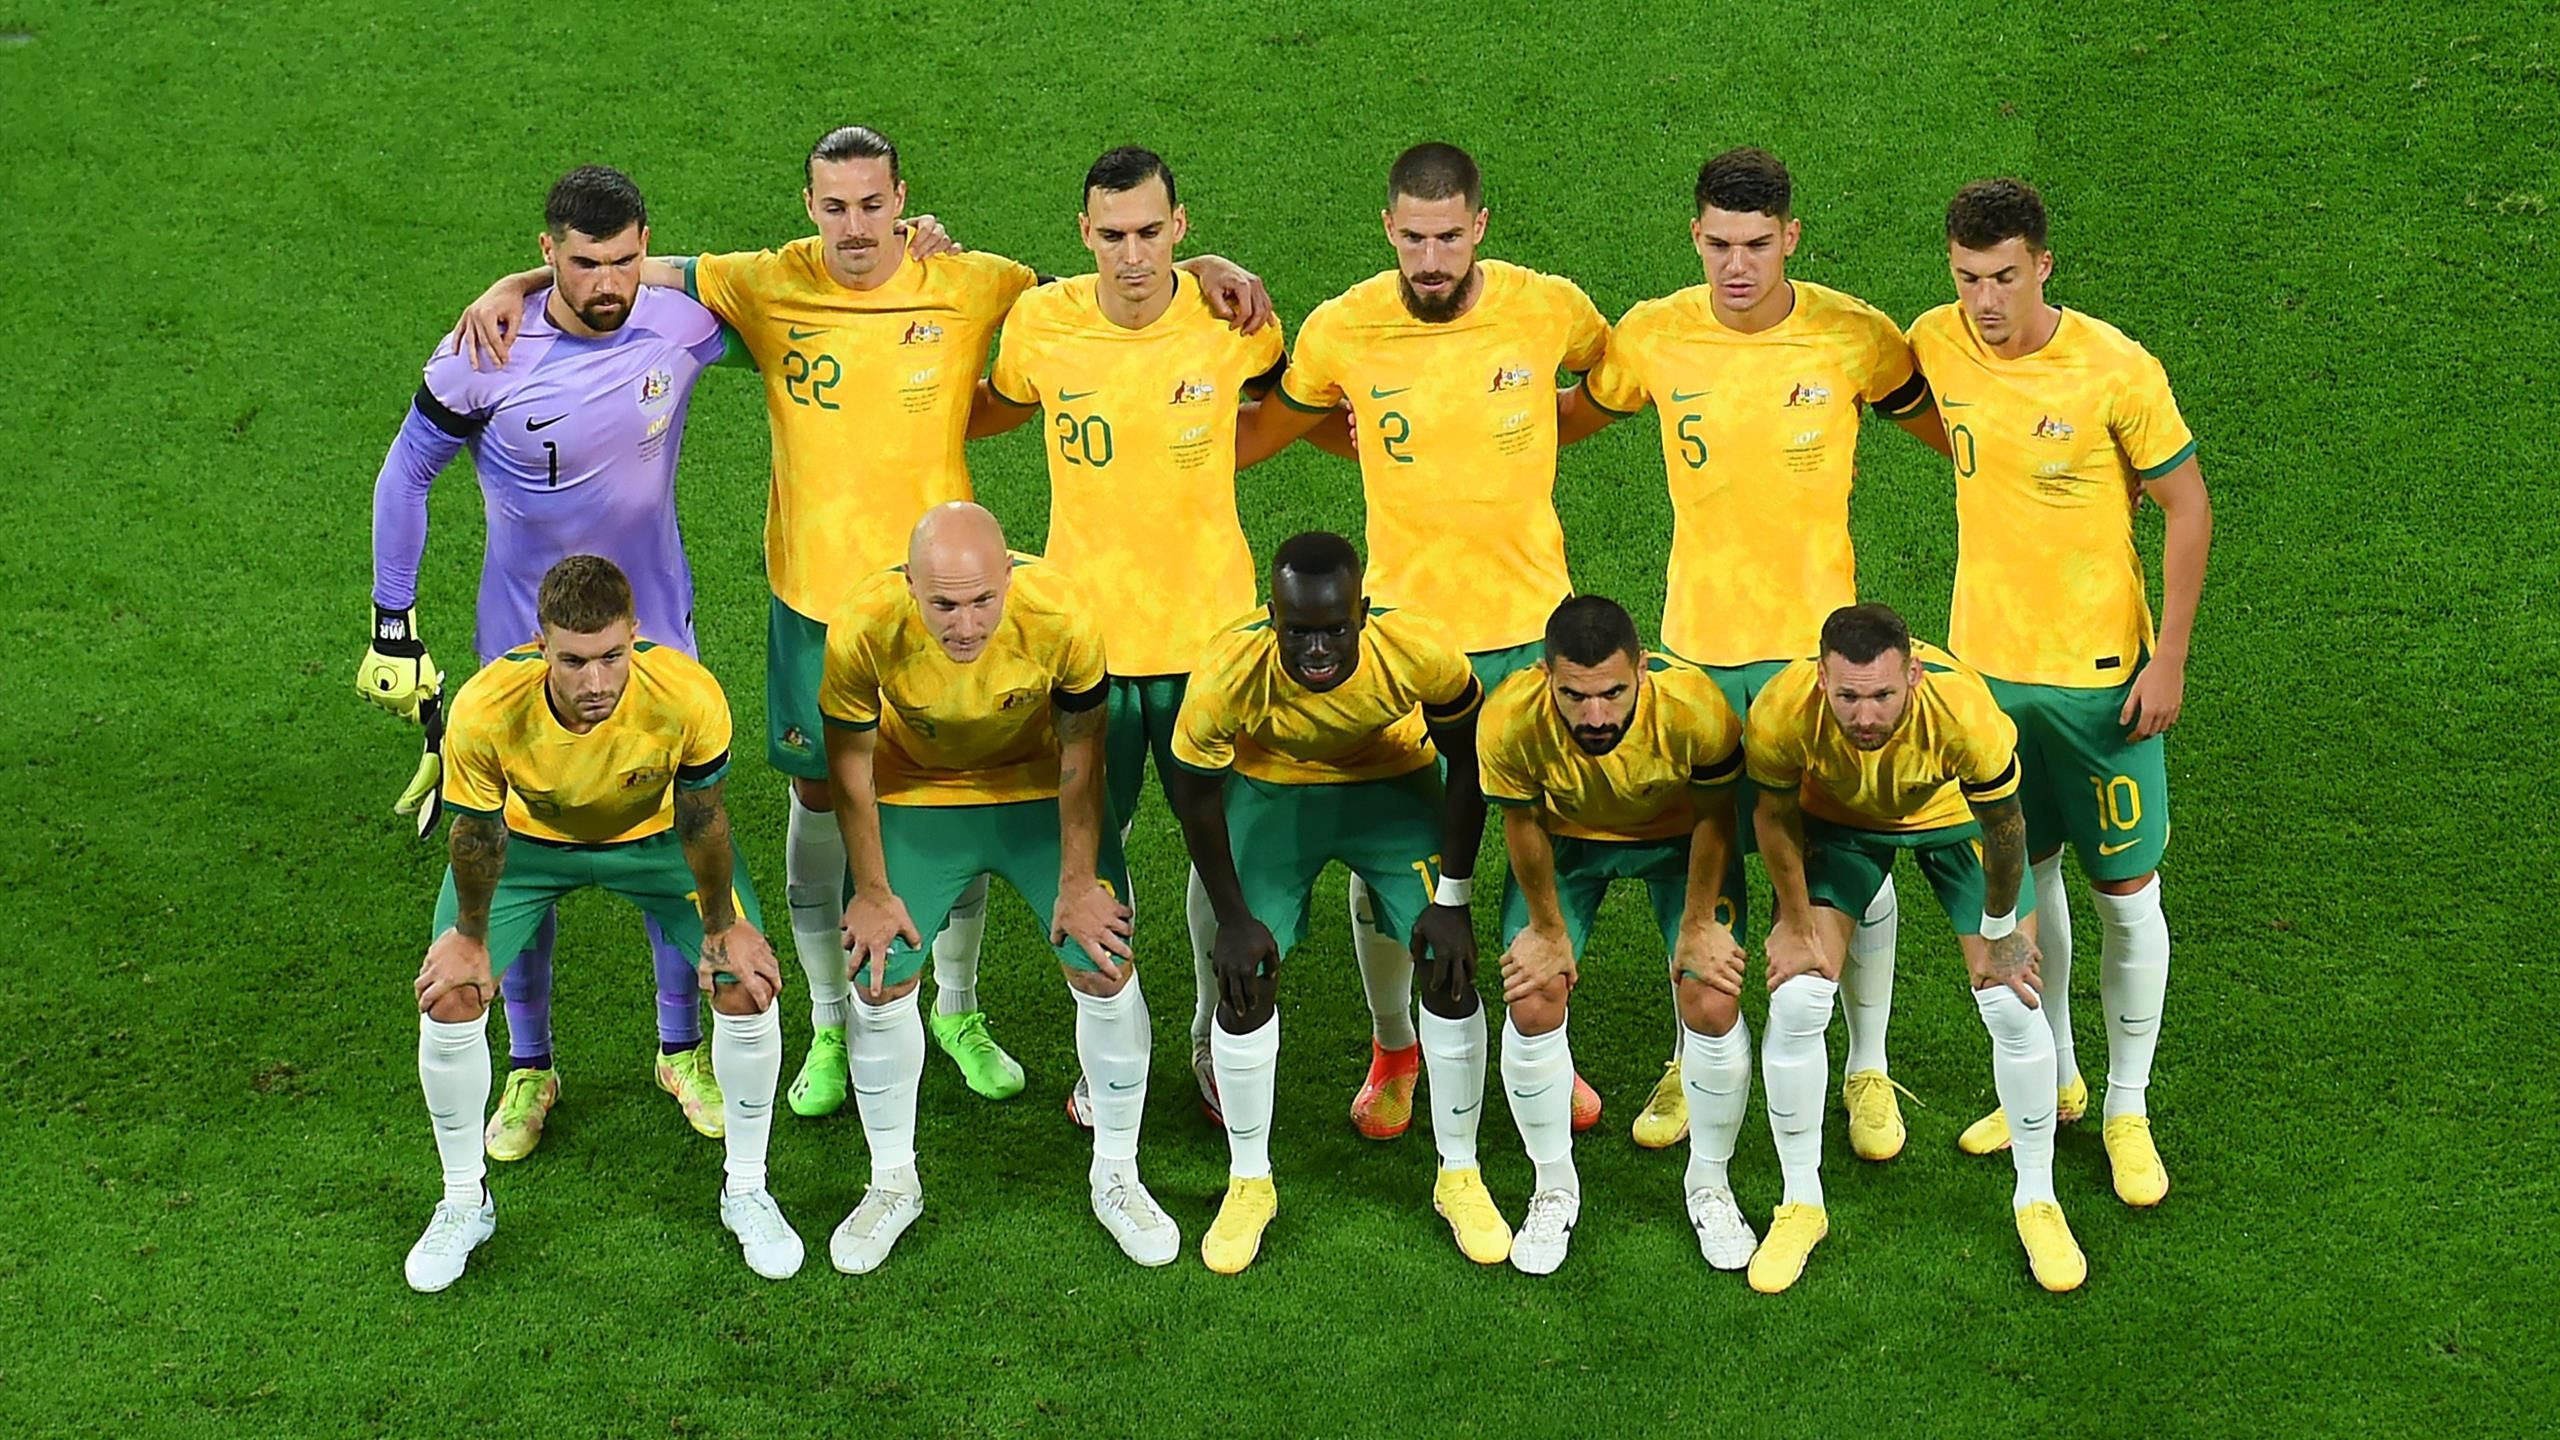 Socceroos make passionate plea over Qatars human rights record ahead of the FIFA World Cup